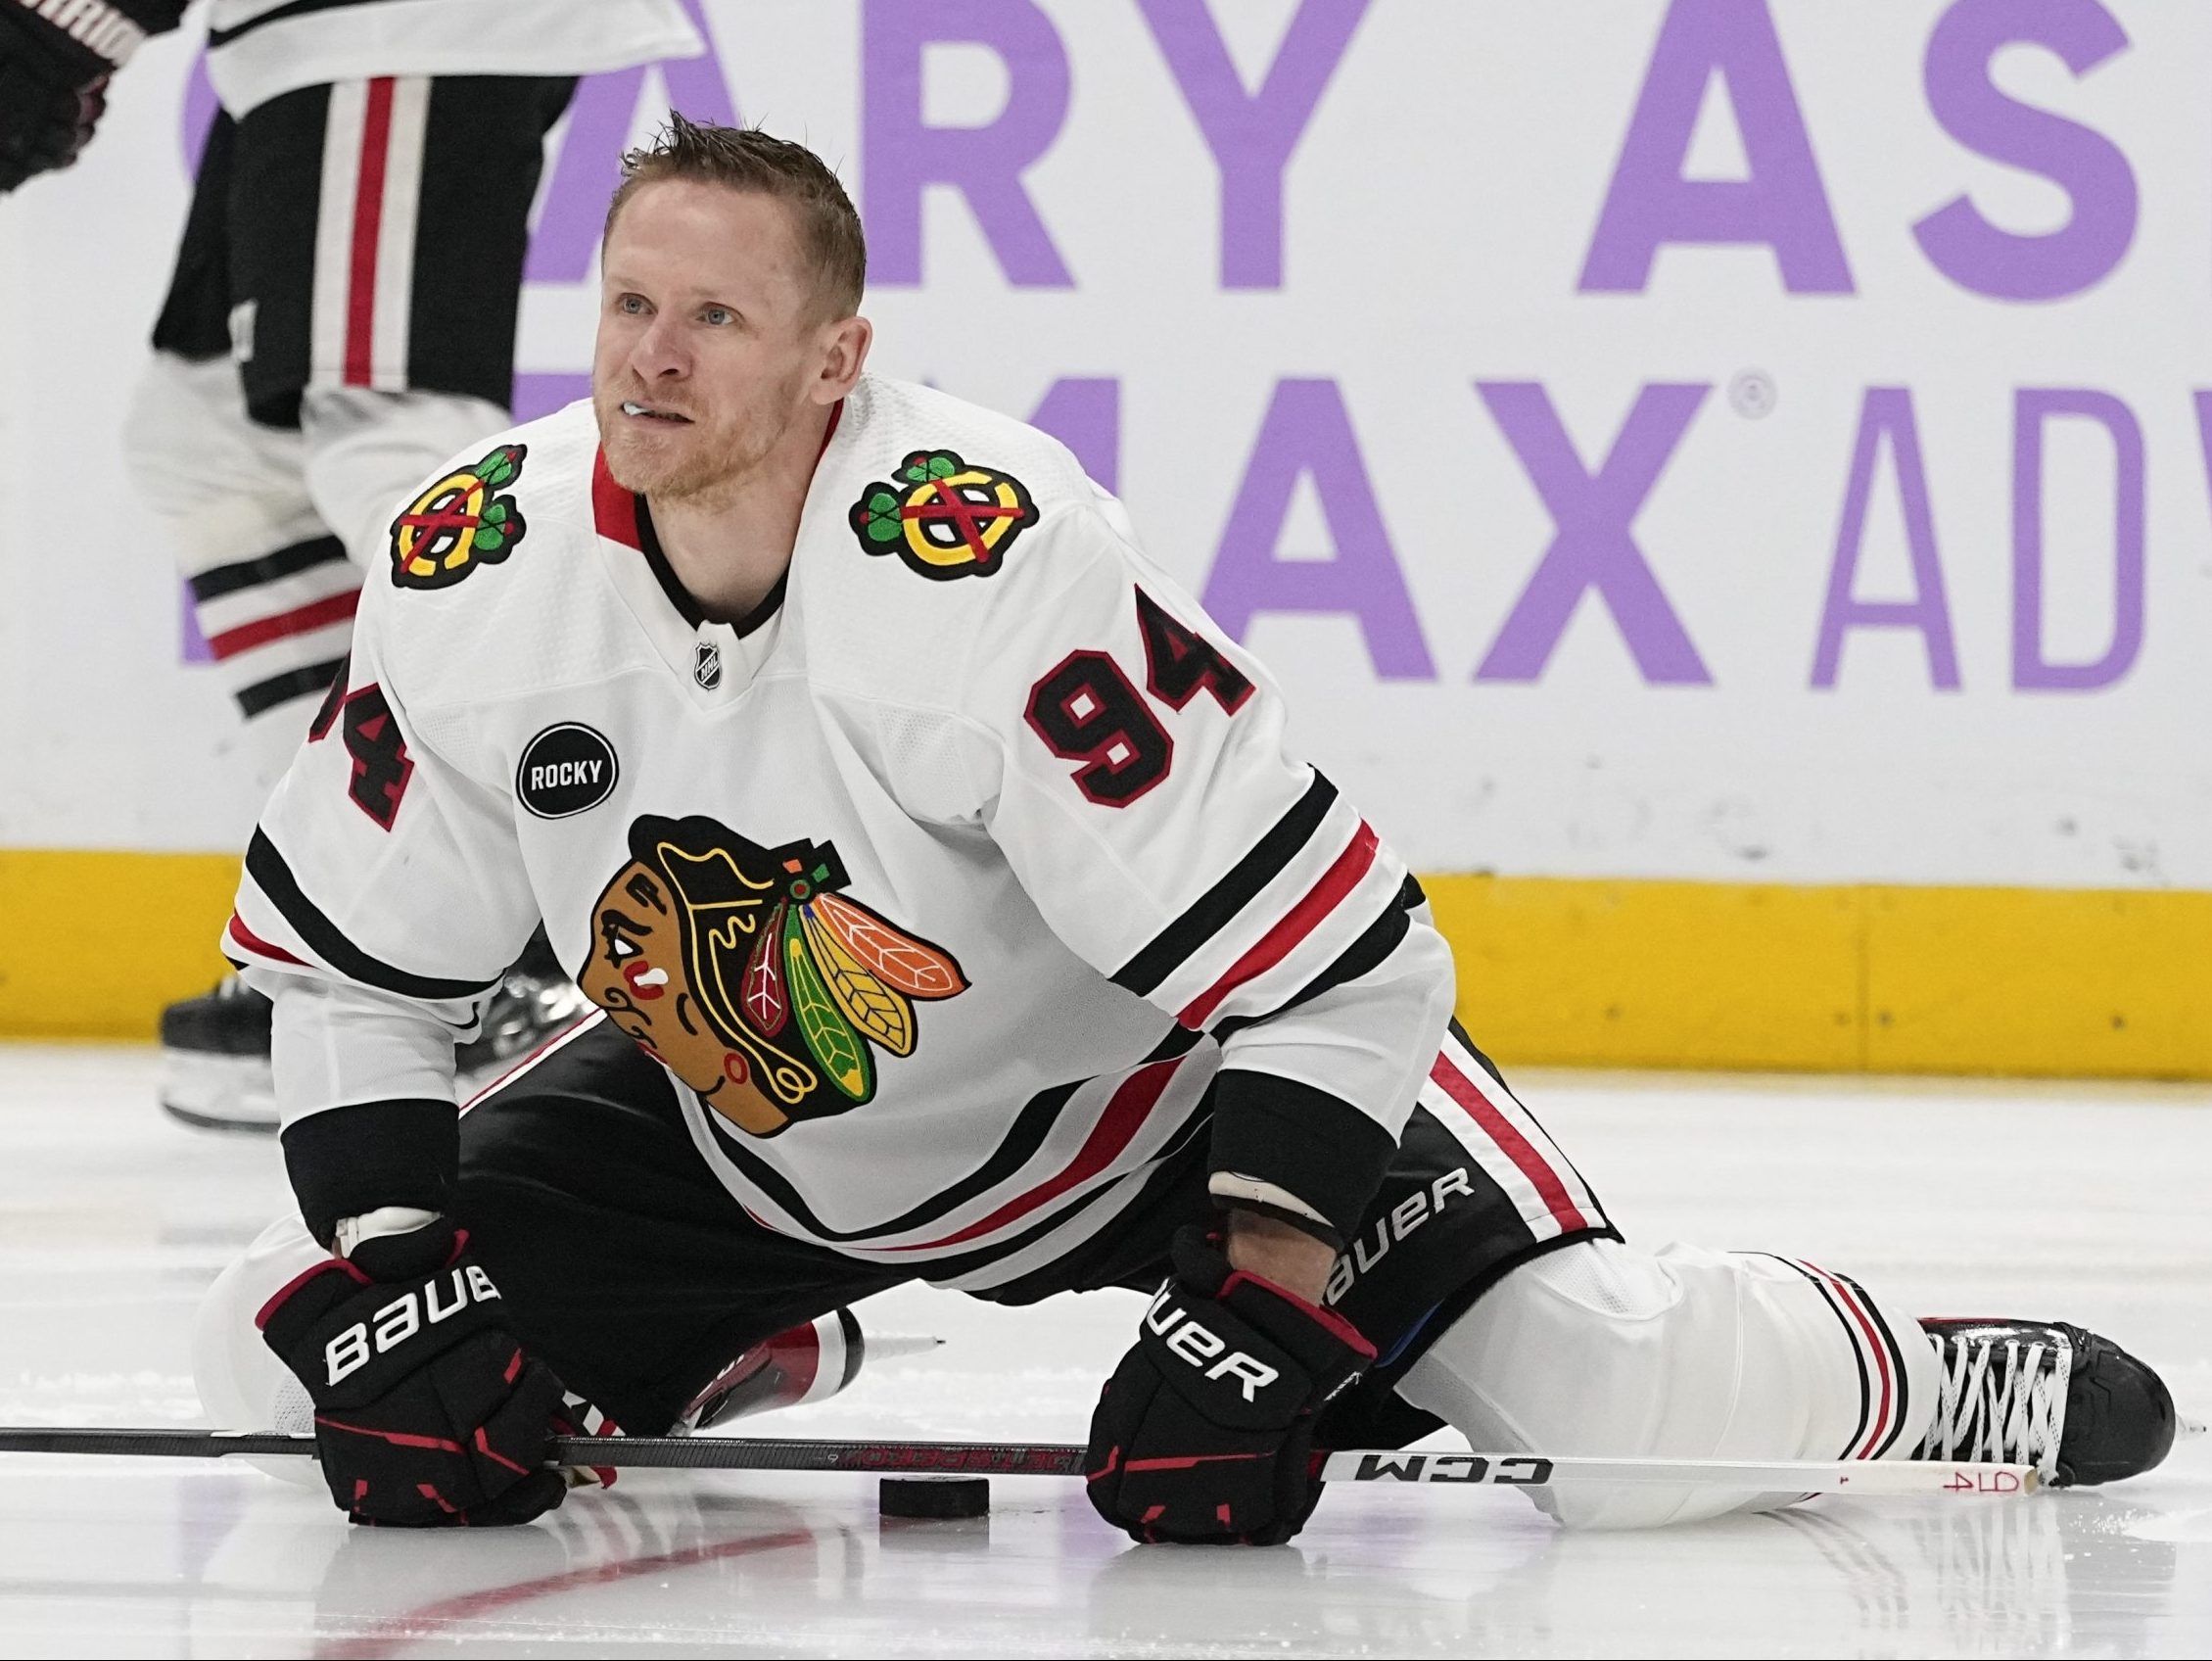 Blackhawks' Corey Perry to be away from team for foreseeable future